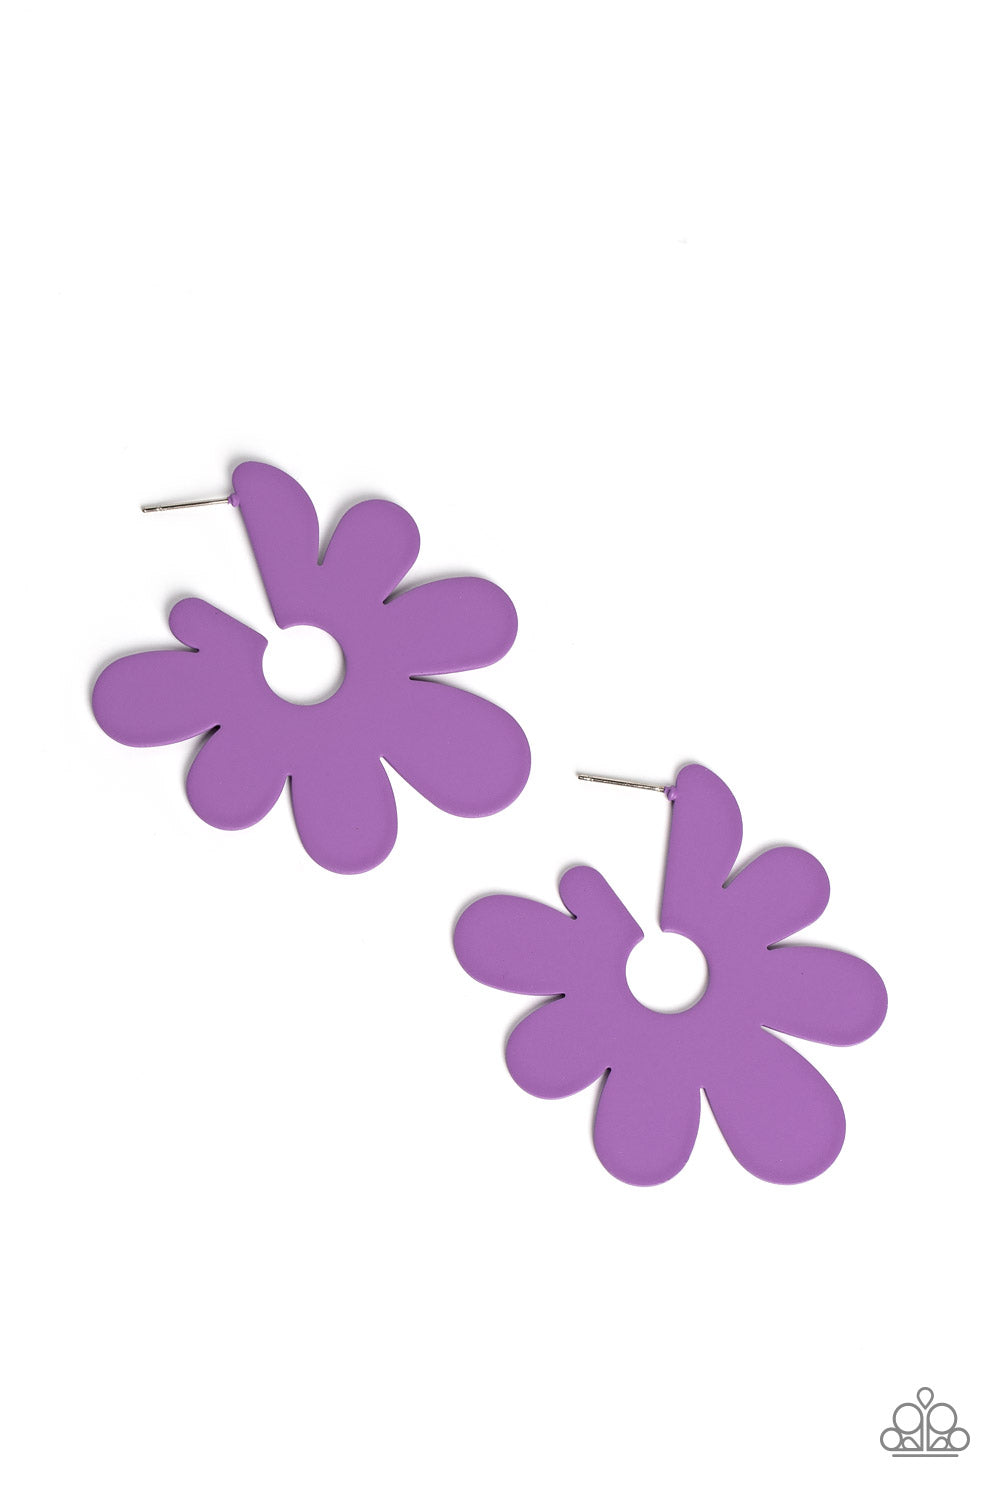 Paparazzi Accessories Flower Power Fantasy - Purple Asymmetrical, oversized purple petals bloom into an abstract flower hoop for a fashionable, attention-grabbing pop of color around the ear. Earring attaches to a standard post fitting. Hoop measures appr